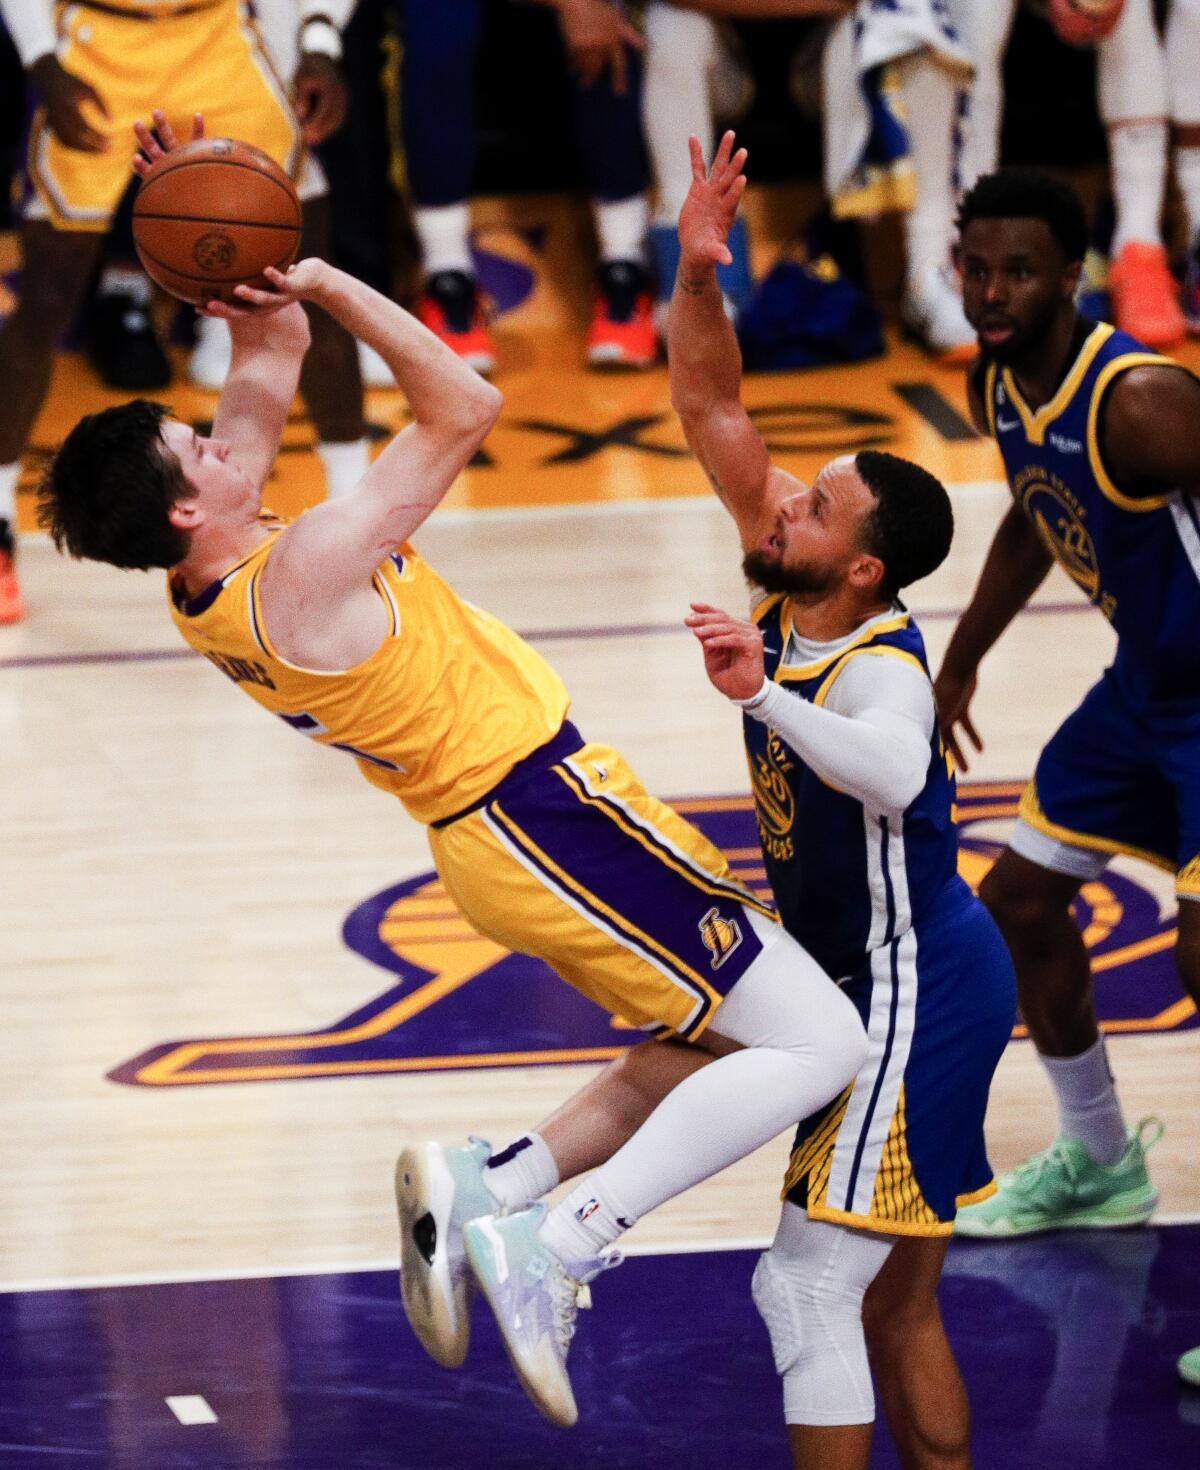 Lakers guard Austin Reaves, left, shoots after being fouled by Warriors guard Stephen Curry.